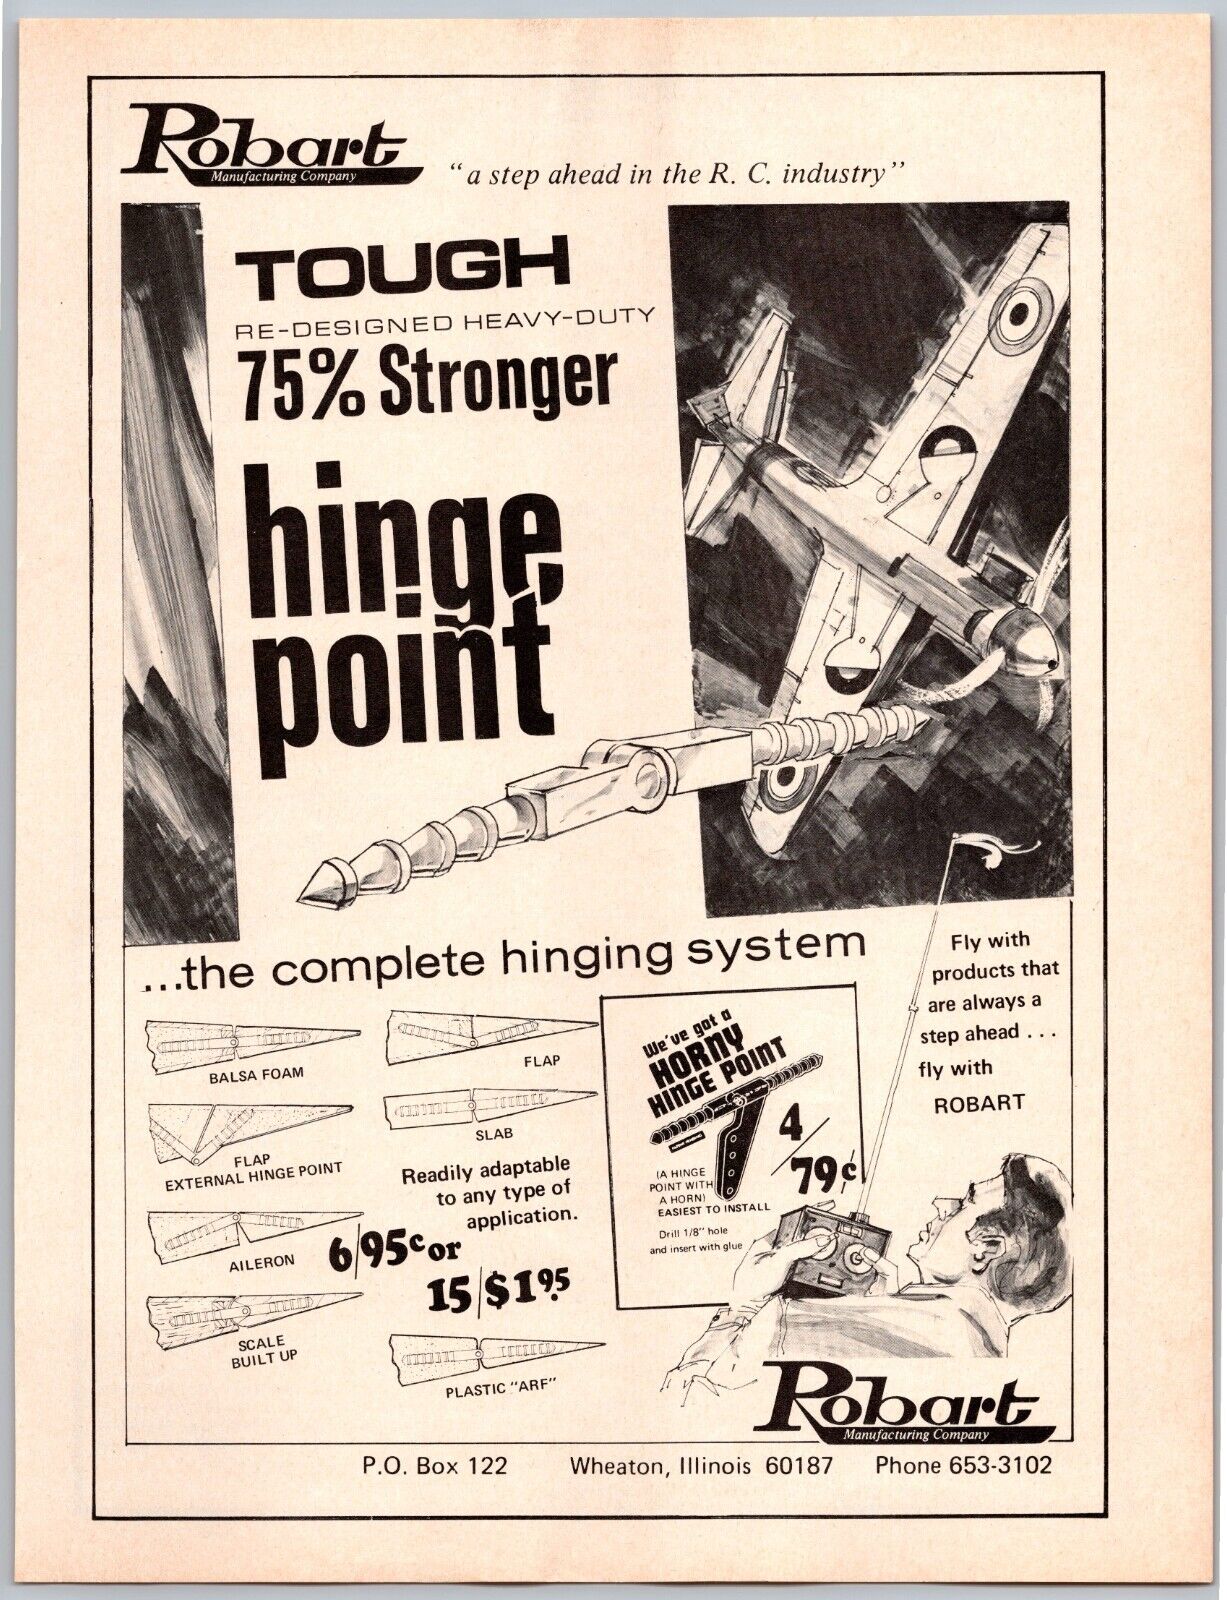 Robart Manufacturing R/C Model Hinge Point Vintage April 1973 Full Page Print Ad